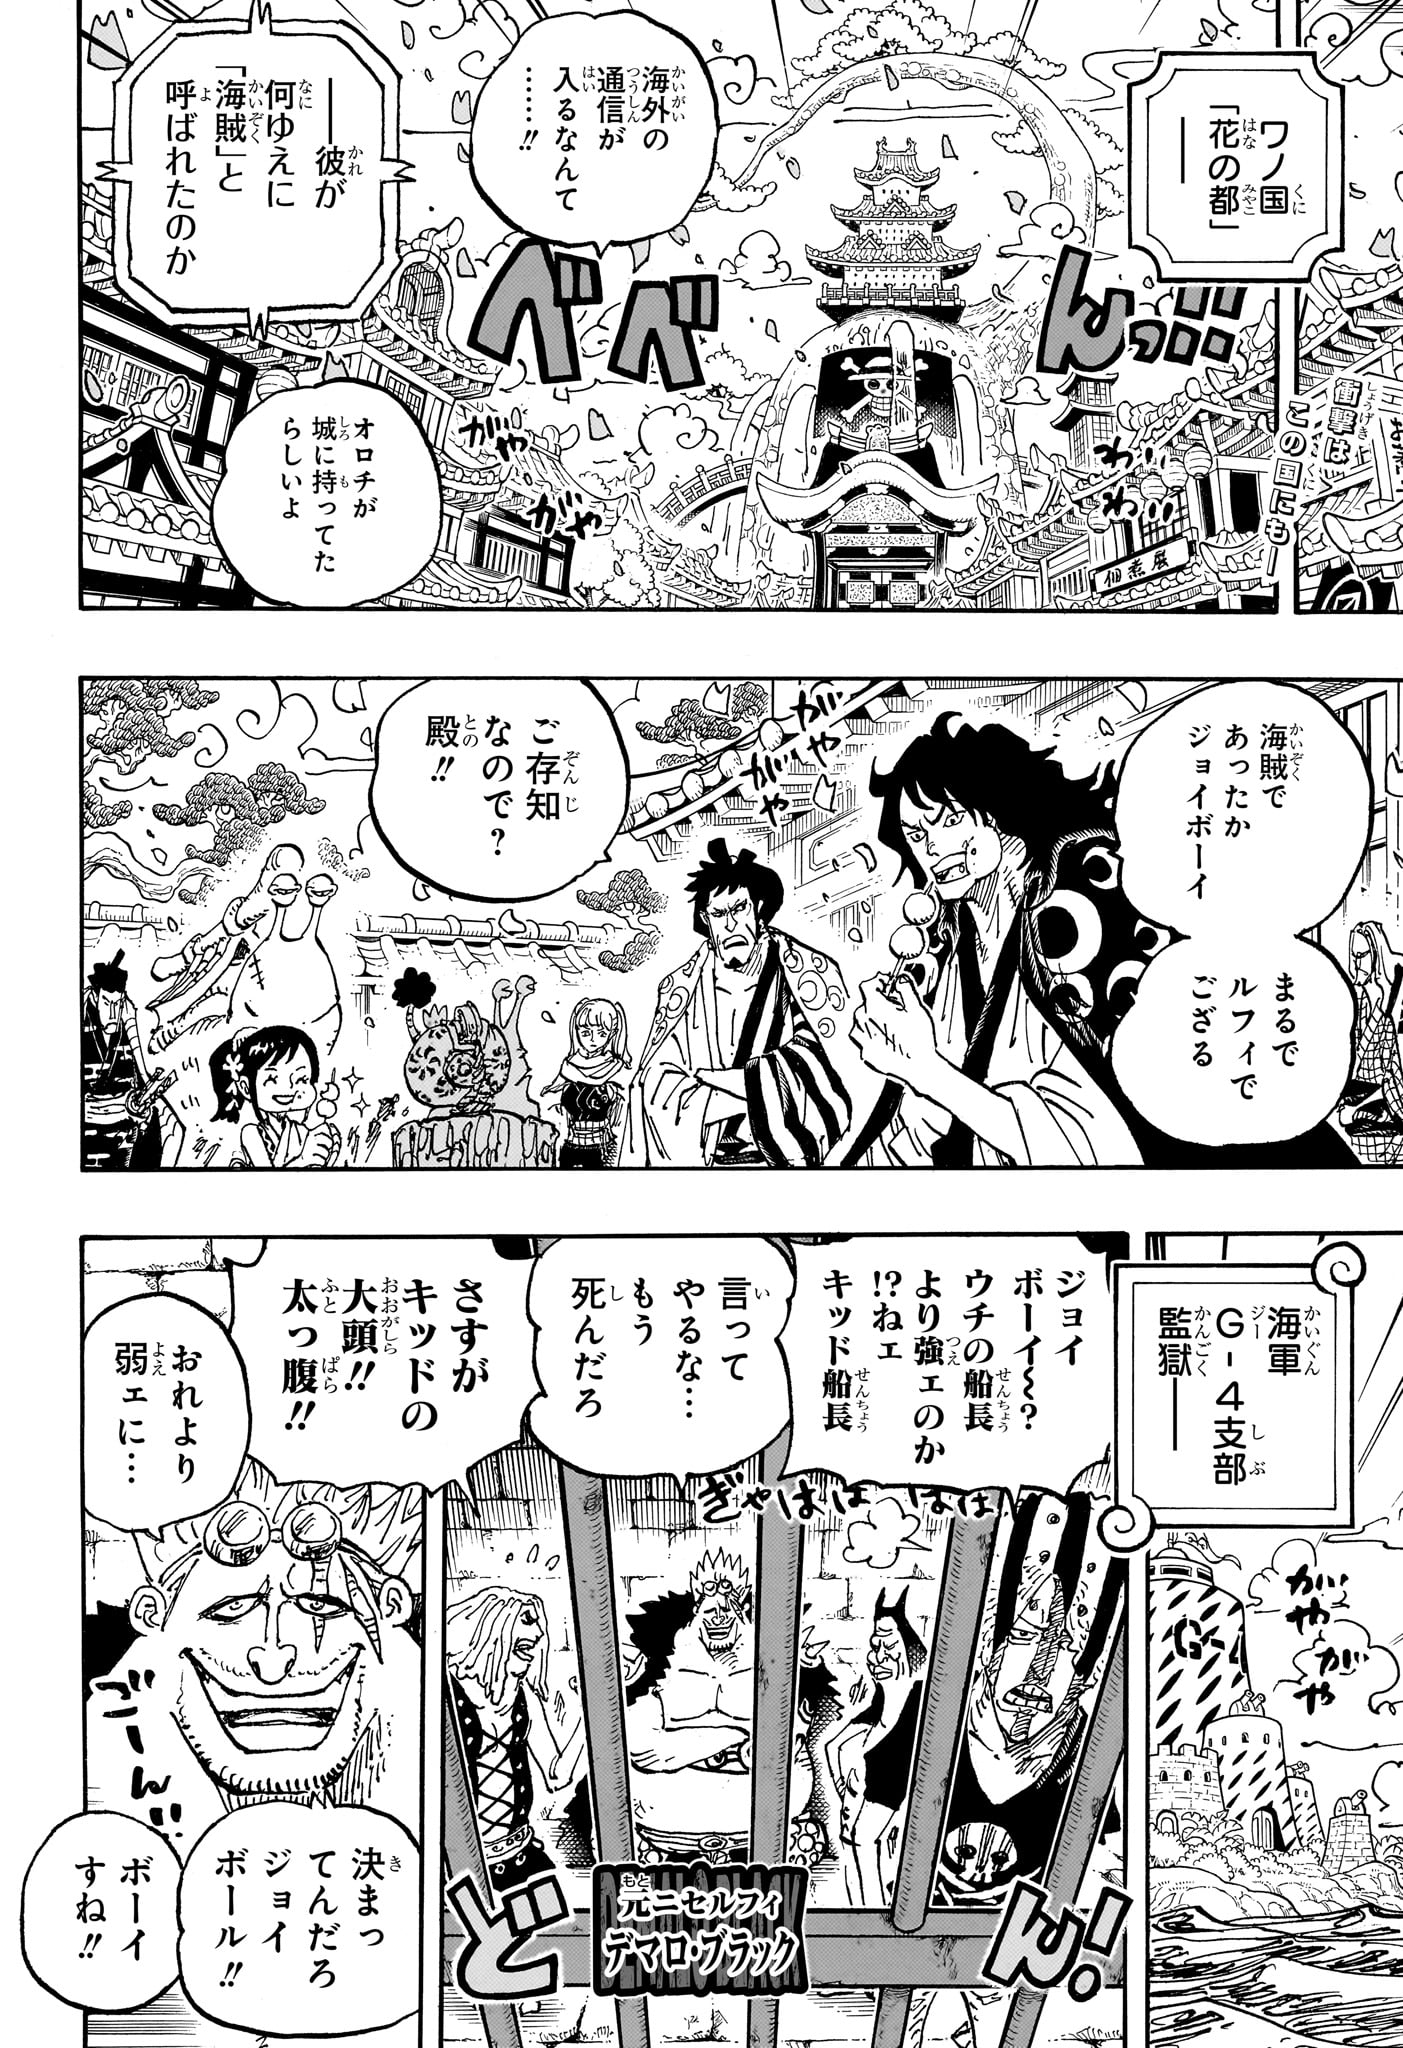 One Piece - Chapter 1115 - Page 2